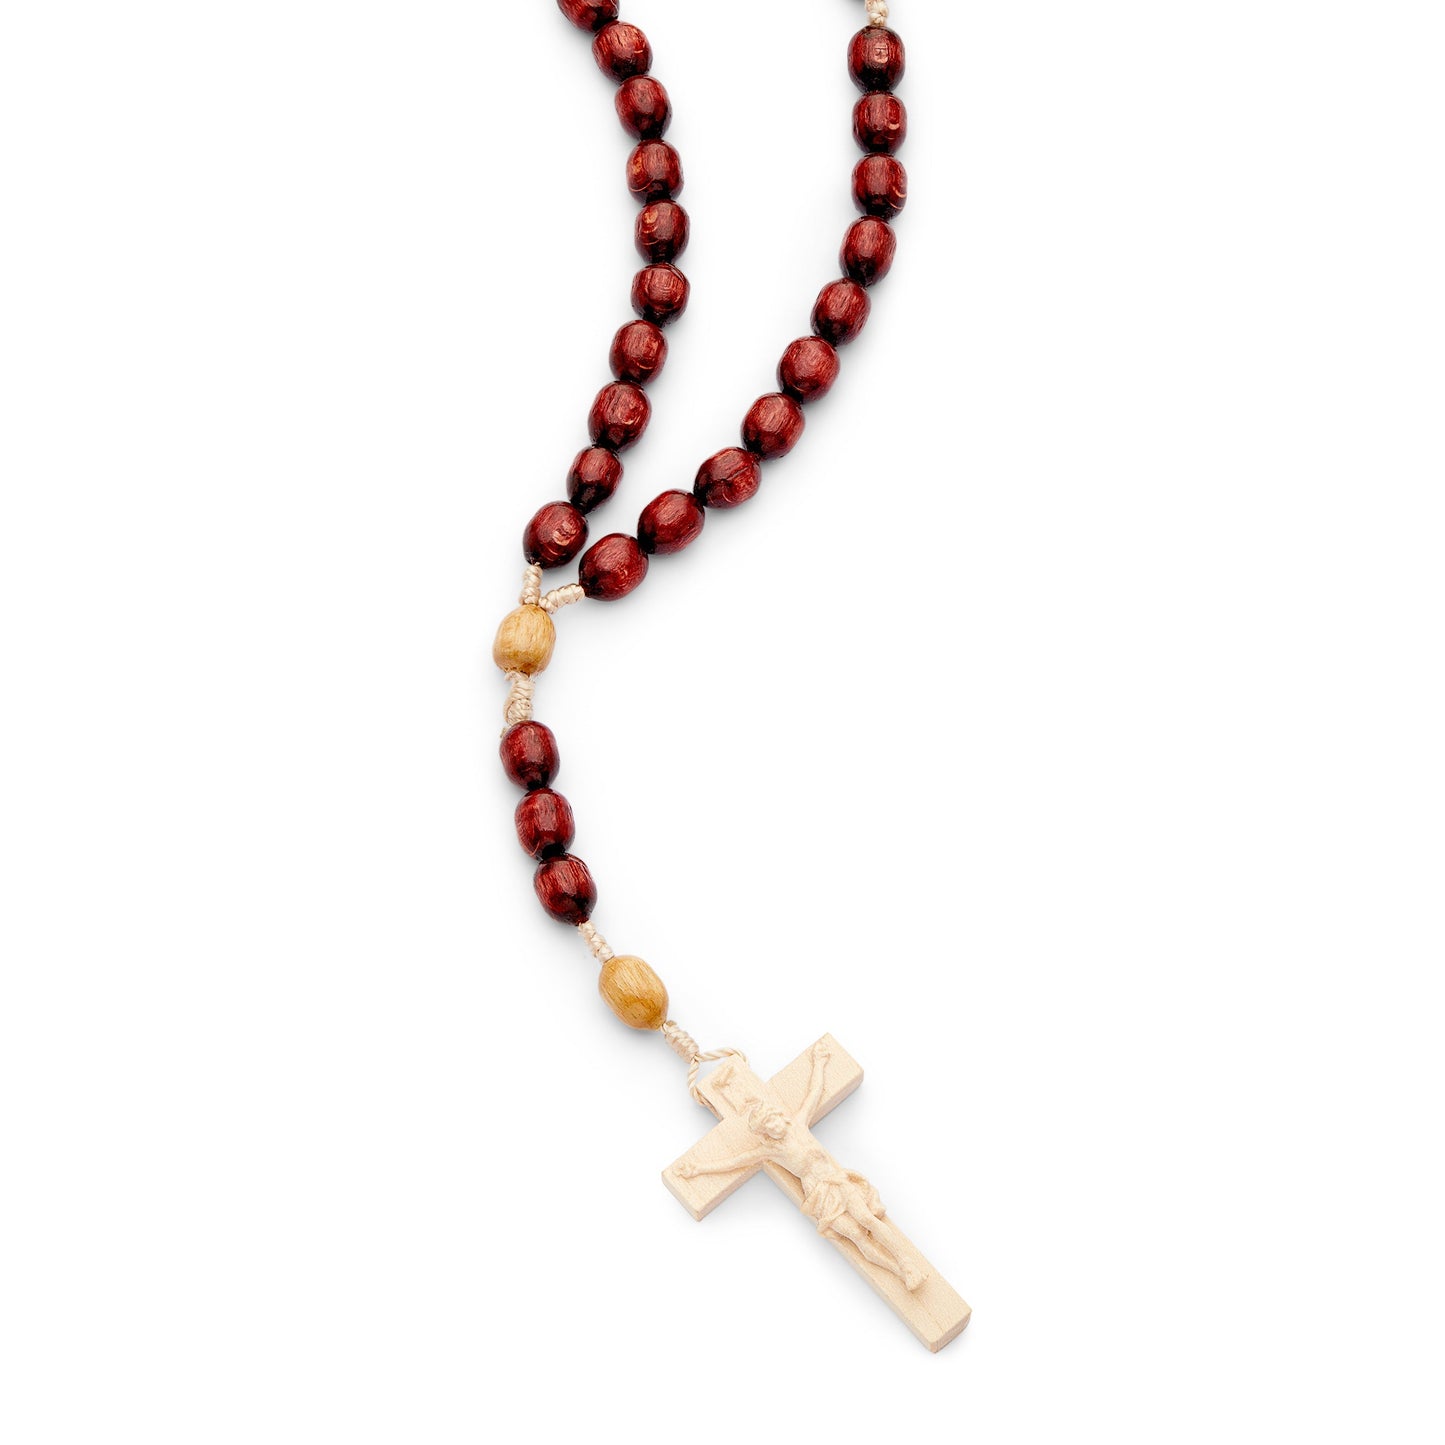 MONDO CATTOLICO Prayer Beads 48 cm (18.9 in) / 10 mm (0.39 in) Rosary in rope with Natural Wood Oval Shape Beads